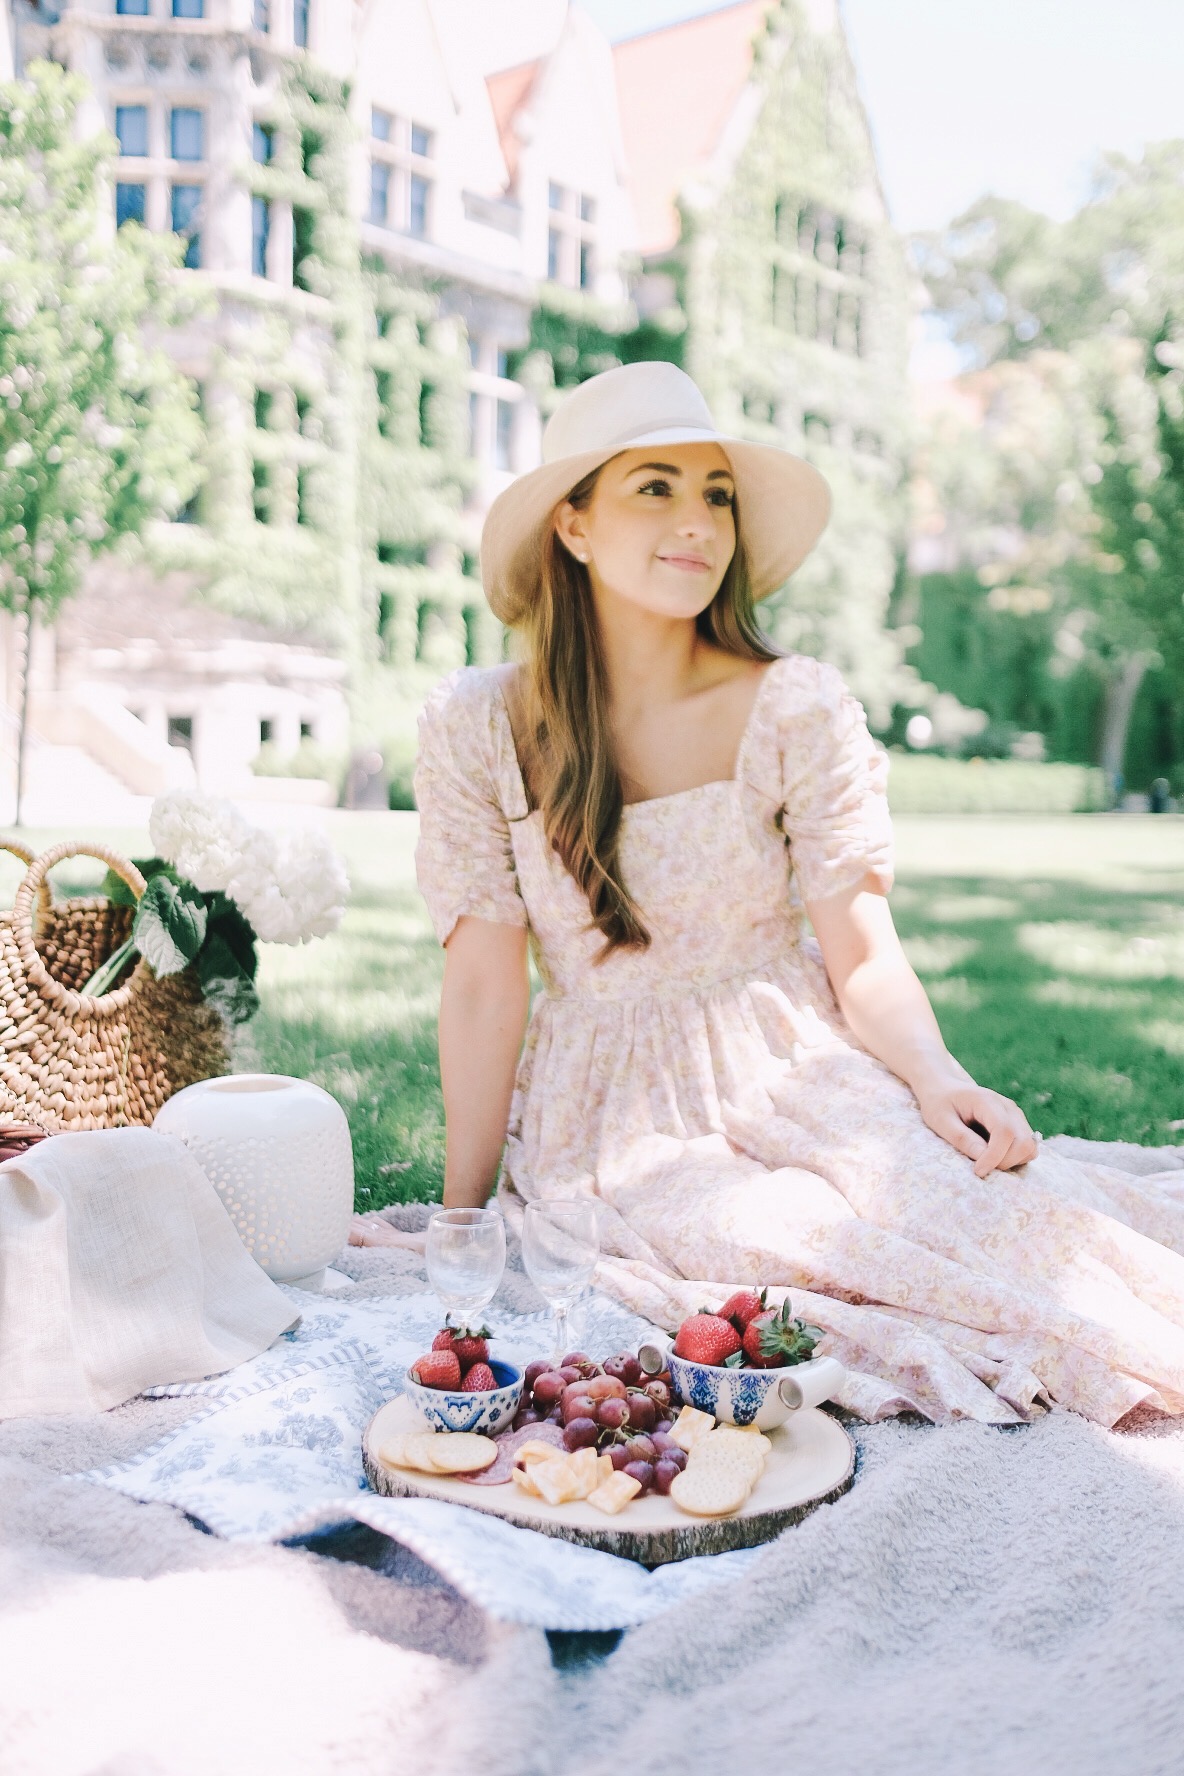 Picnic in the park | Miss Madeline Rose